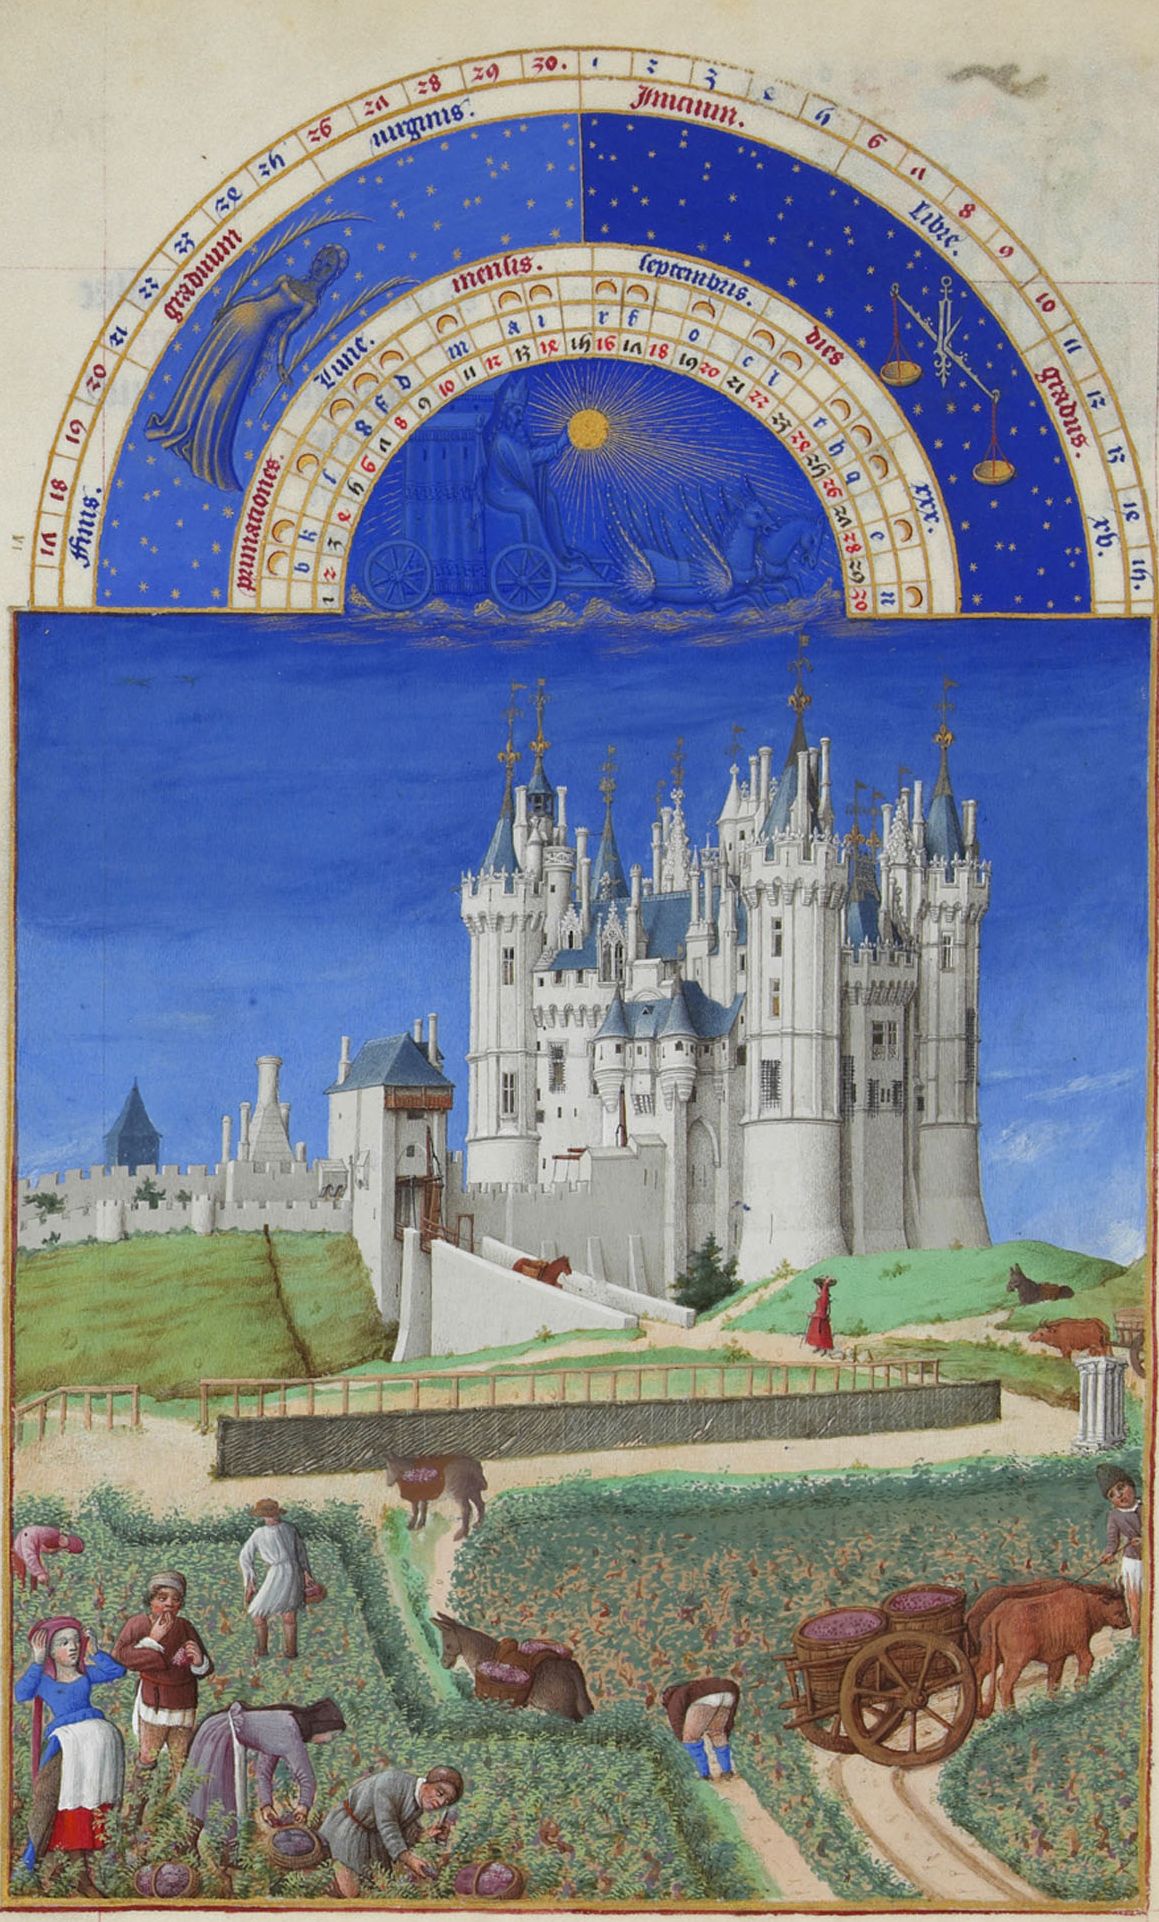 The Très Riches Heures du Duc de Berry (English: The Very Rich Hours of the Duke of Berry) or Très Riches Heures, was created between c. 1412 and 1416 for the extravagant royal bibliophile and patron John, Duke of Berry, by the Limbourg brothers.